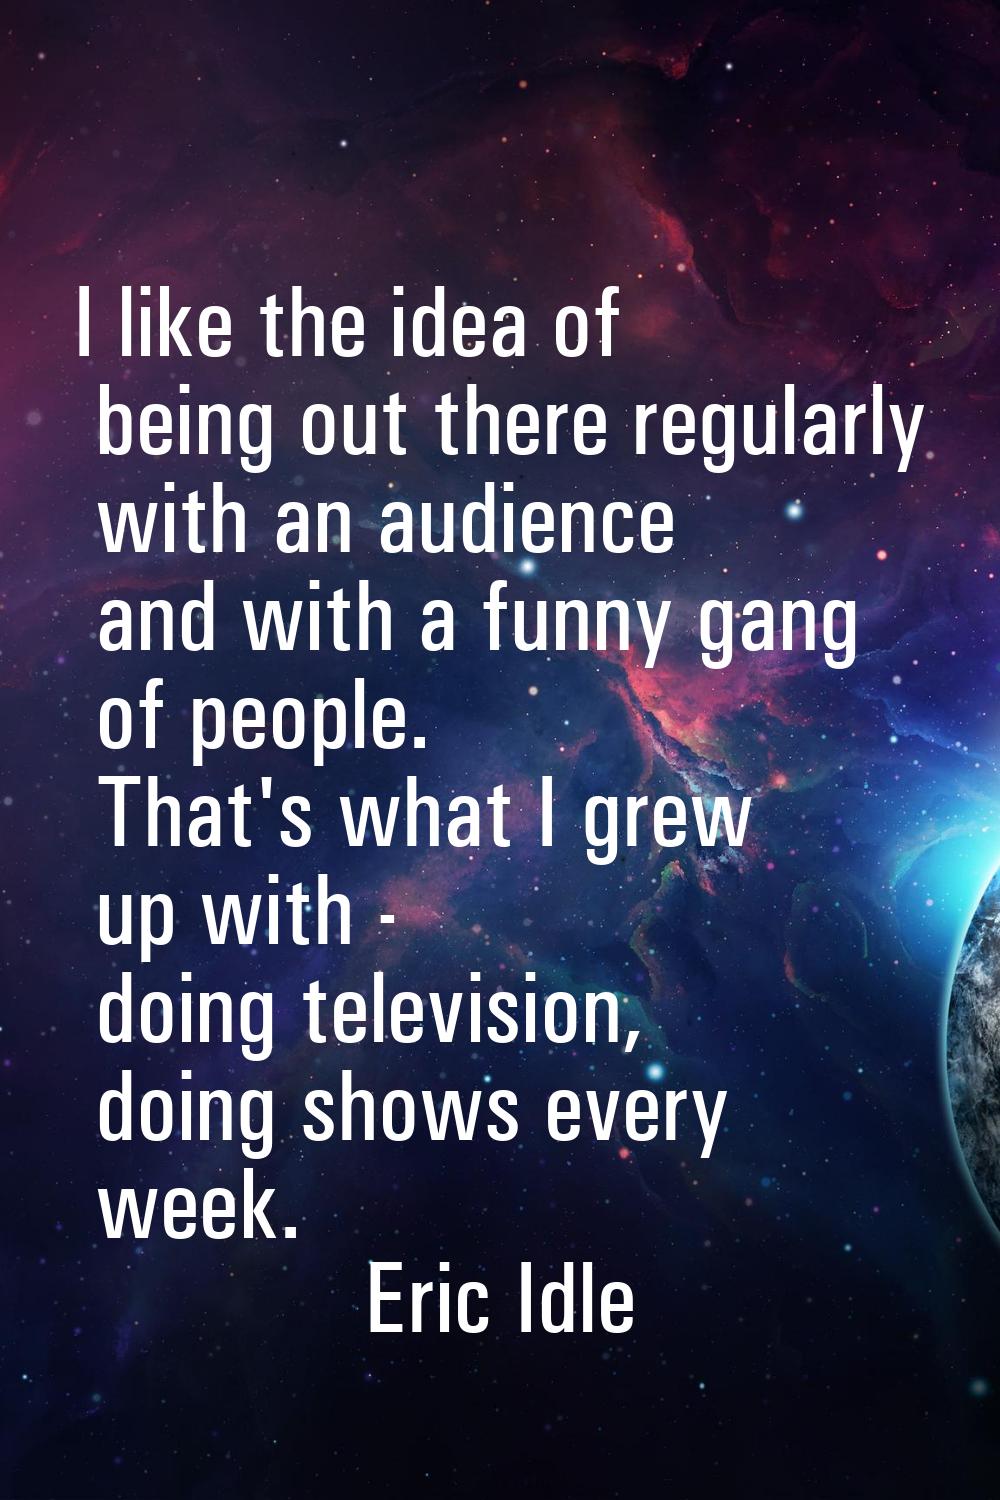 I like the idea of being out there regularly with an audience and with a funny gang of people. That